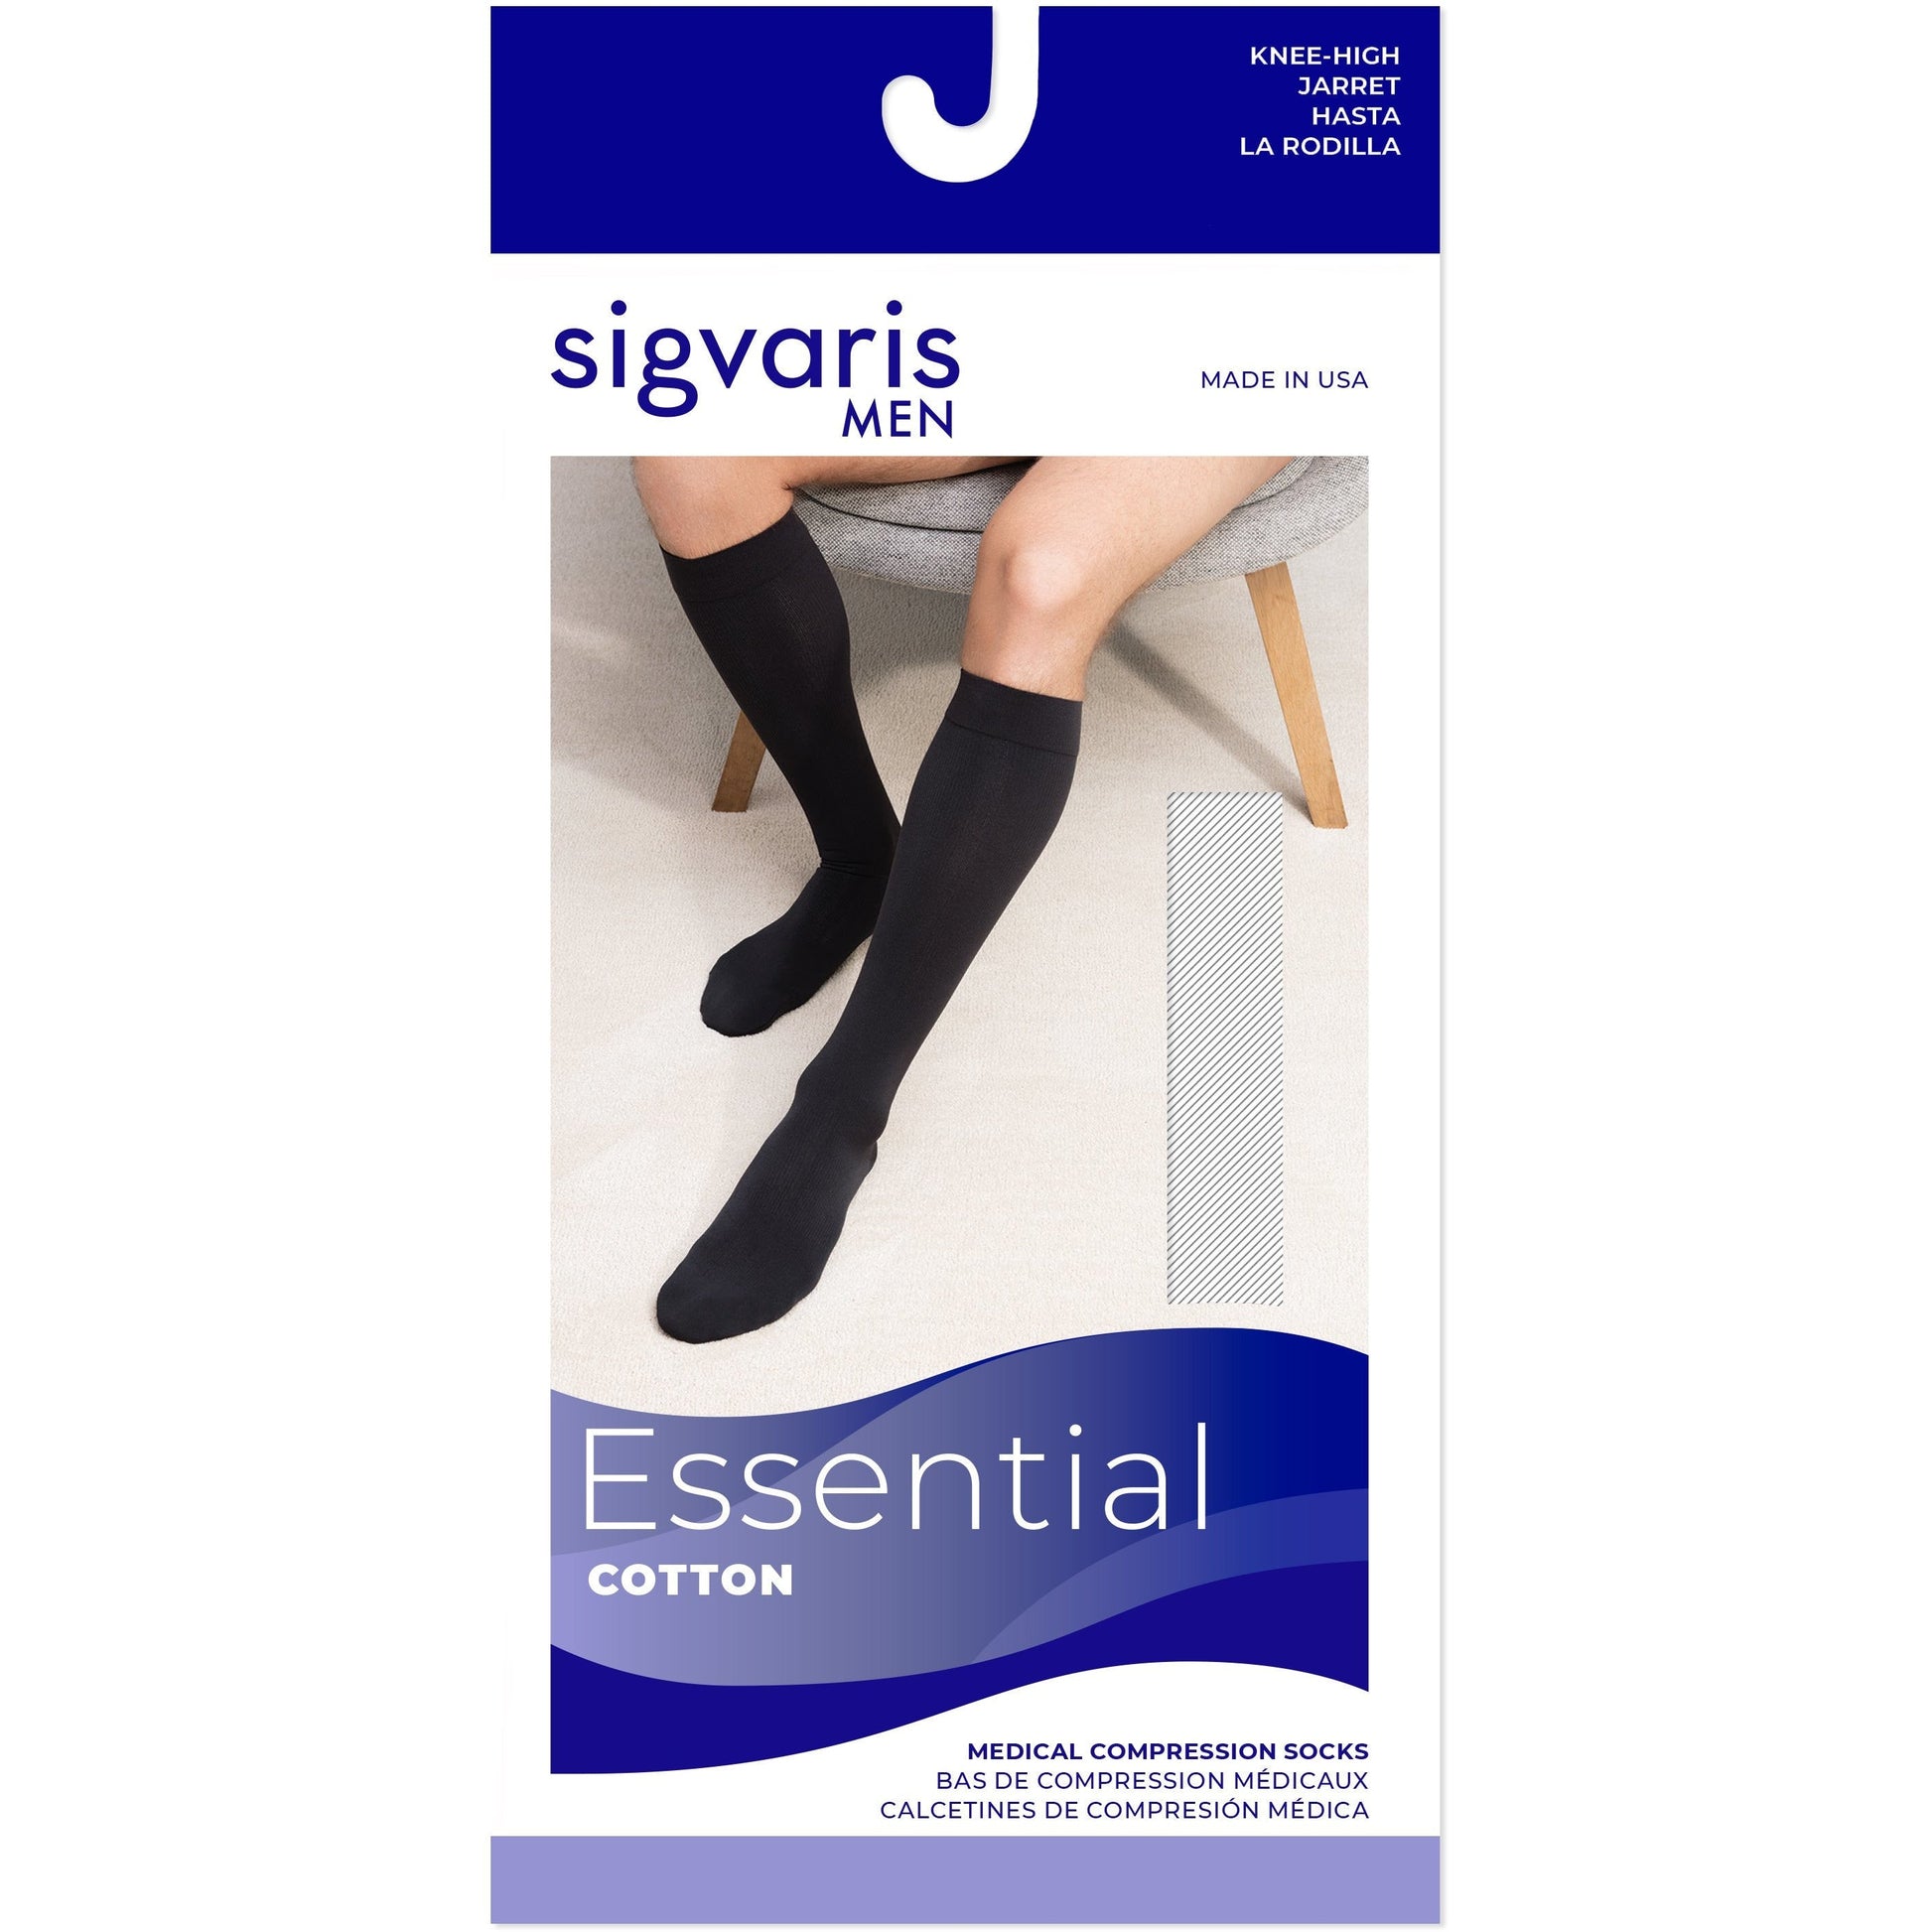 Sigvaris Cotton Men's 20-30 mmHg Knee w/ Silicone Band Grip Top